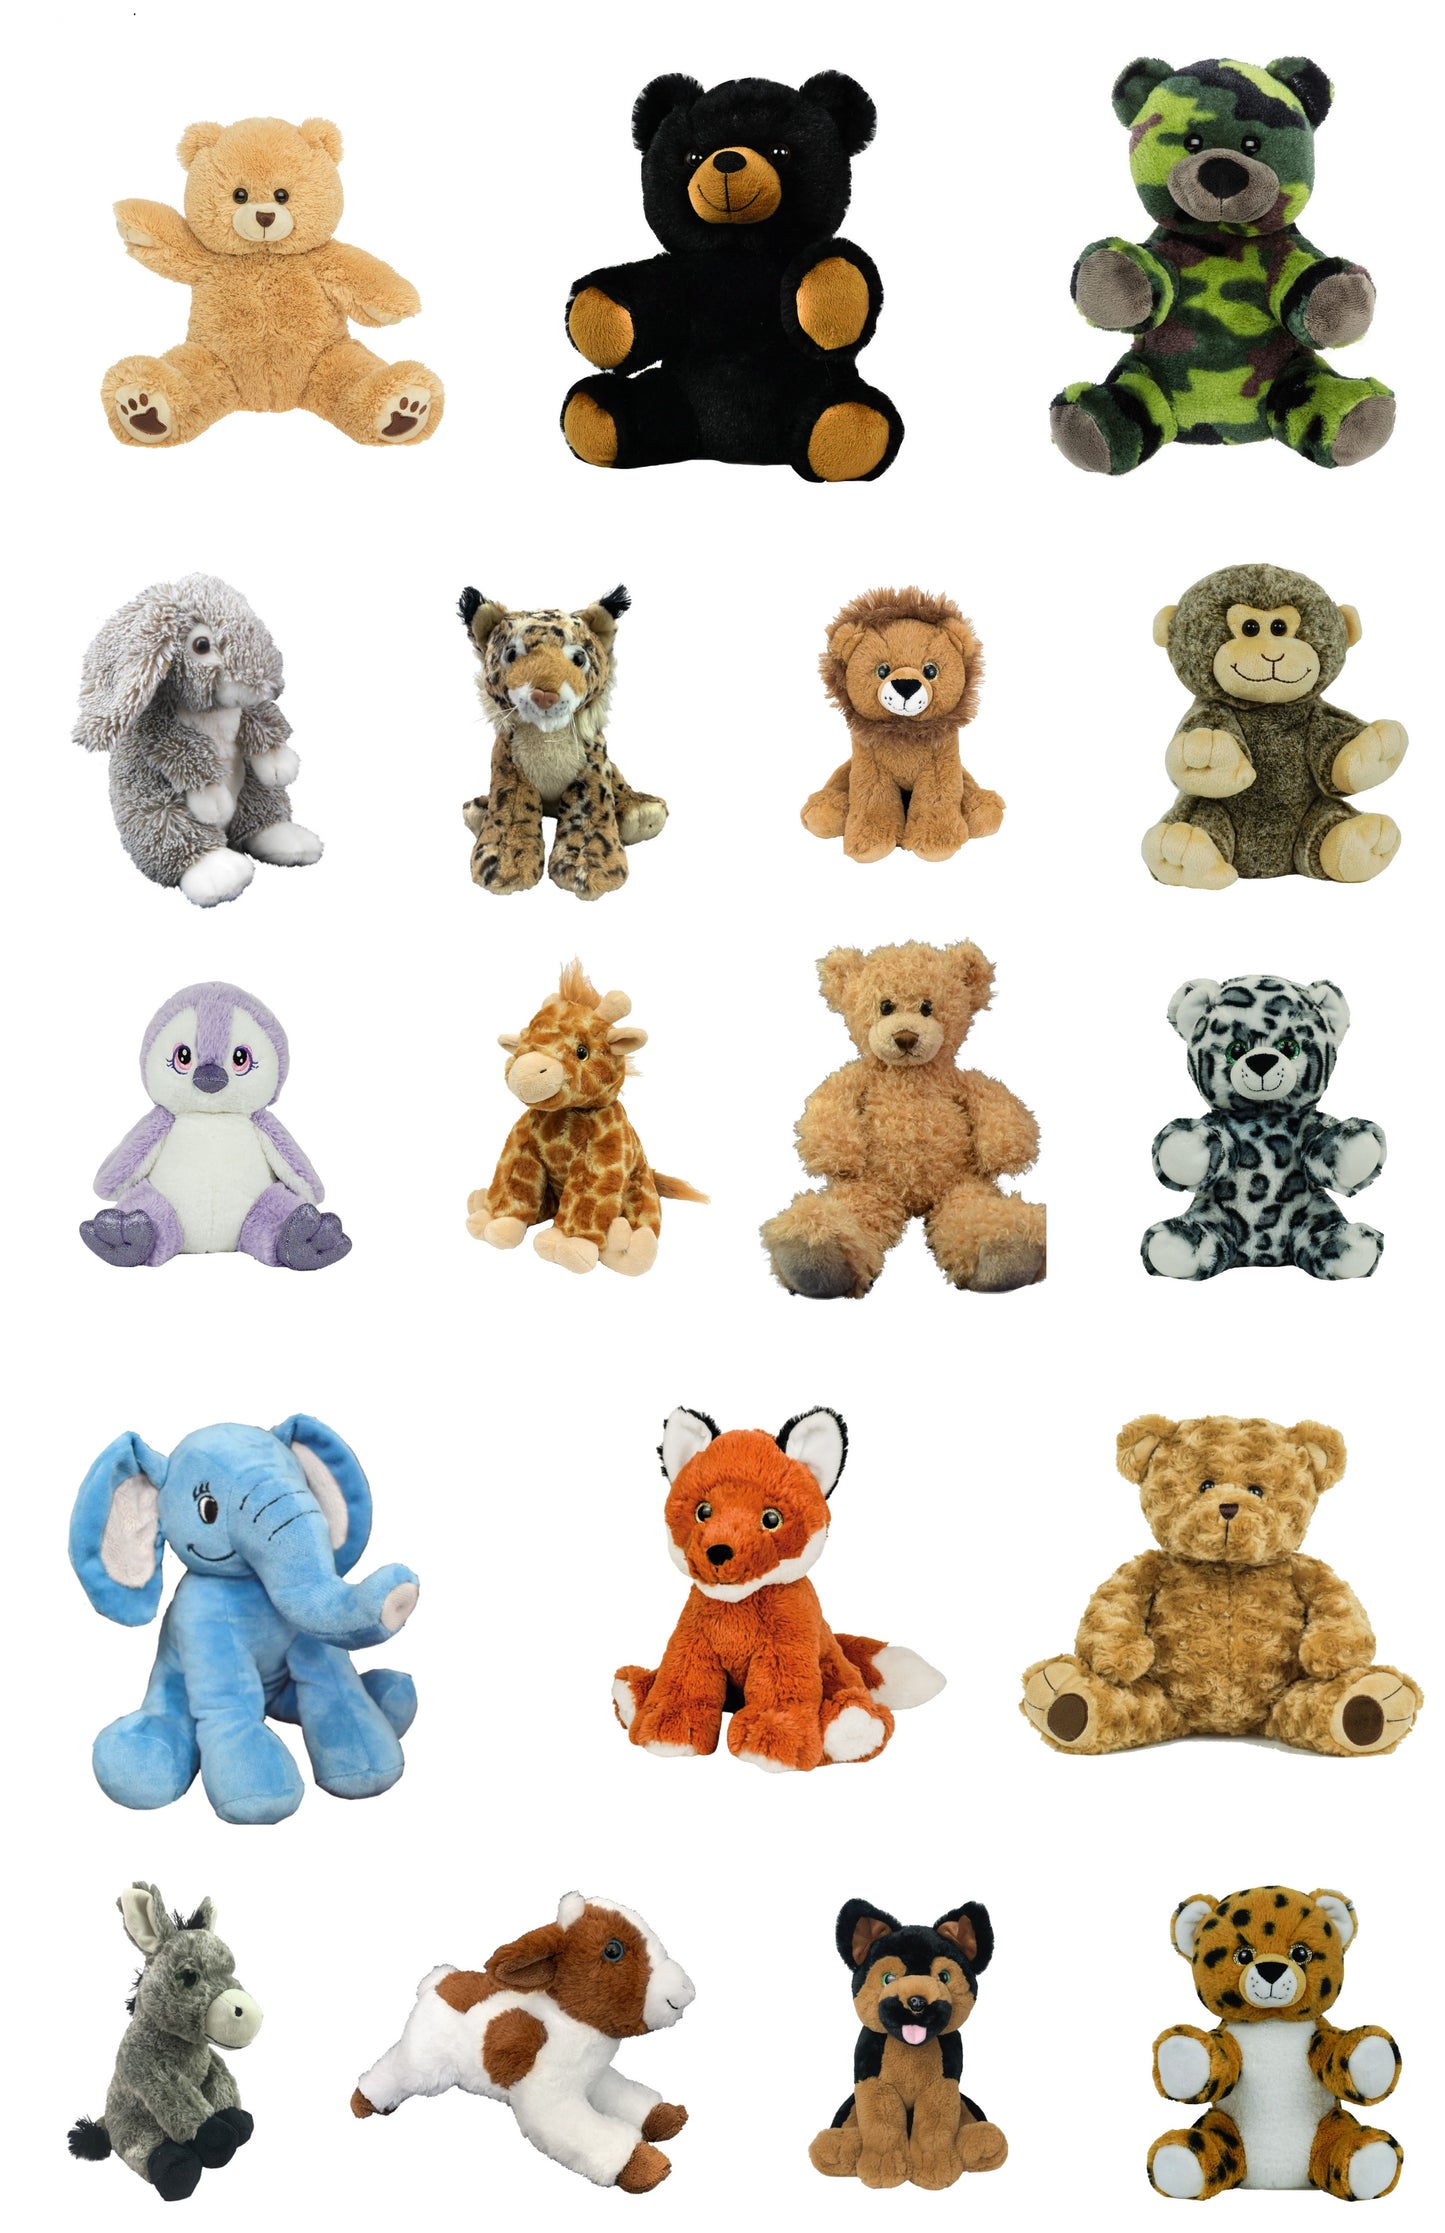 10 CUTE 8 INCH ASSORTED PLUSH UNSTUFFED ANIMAL KITS. MAKE YOUR OWN STUFFED ANIMAL PARTY